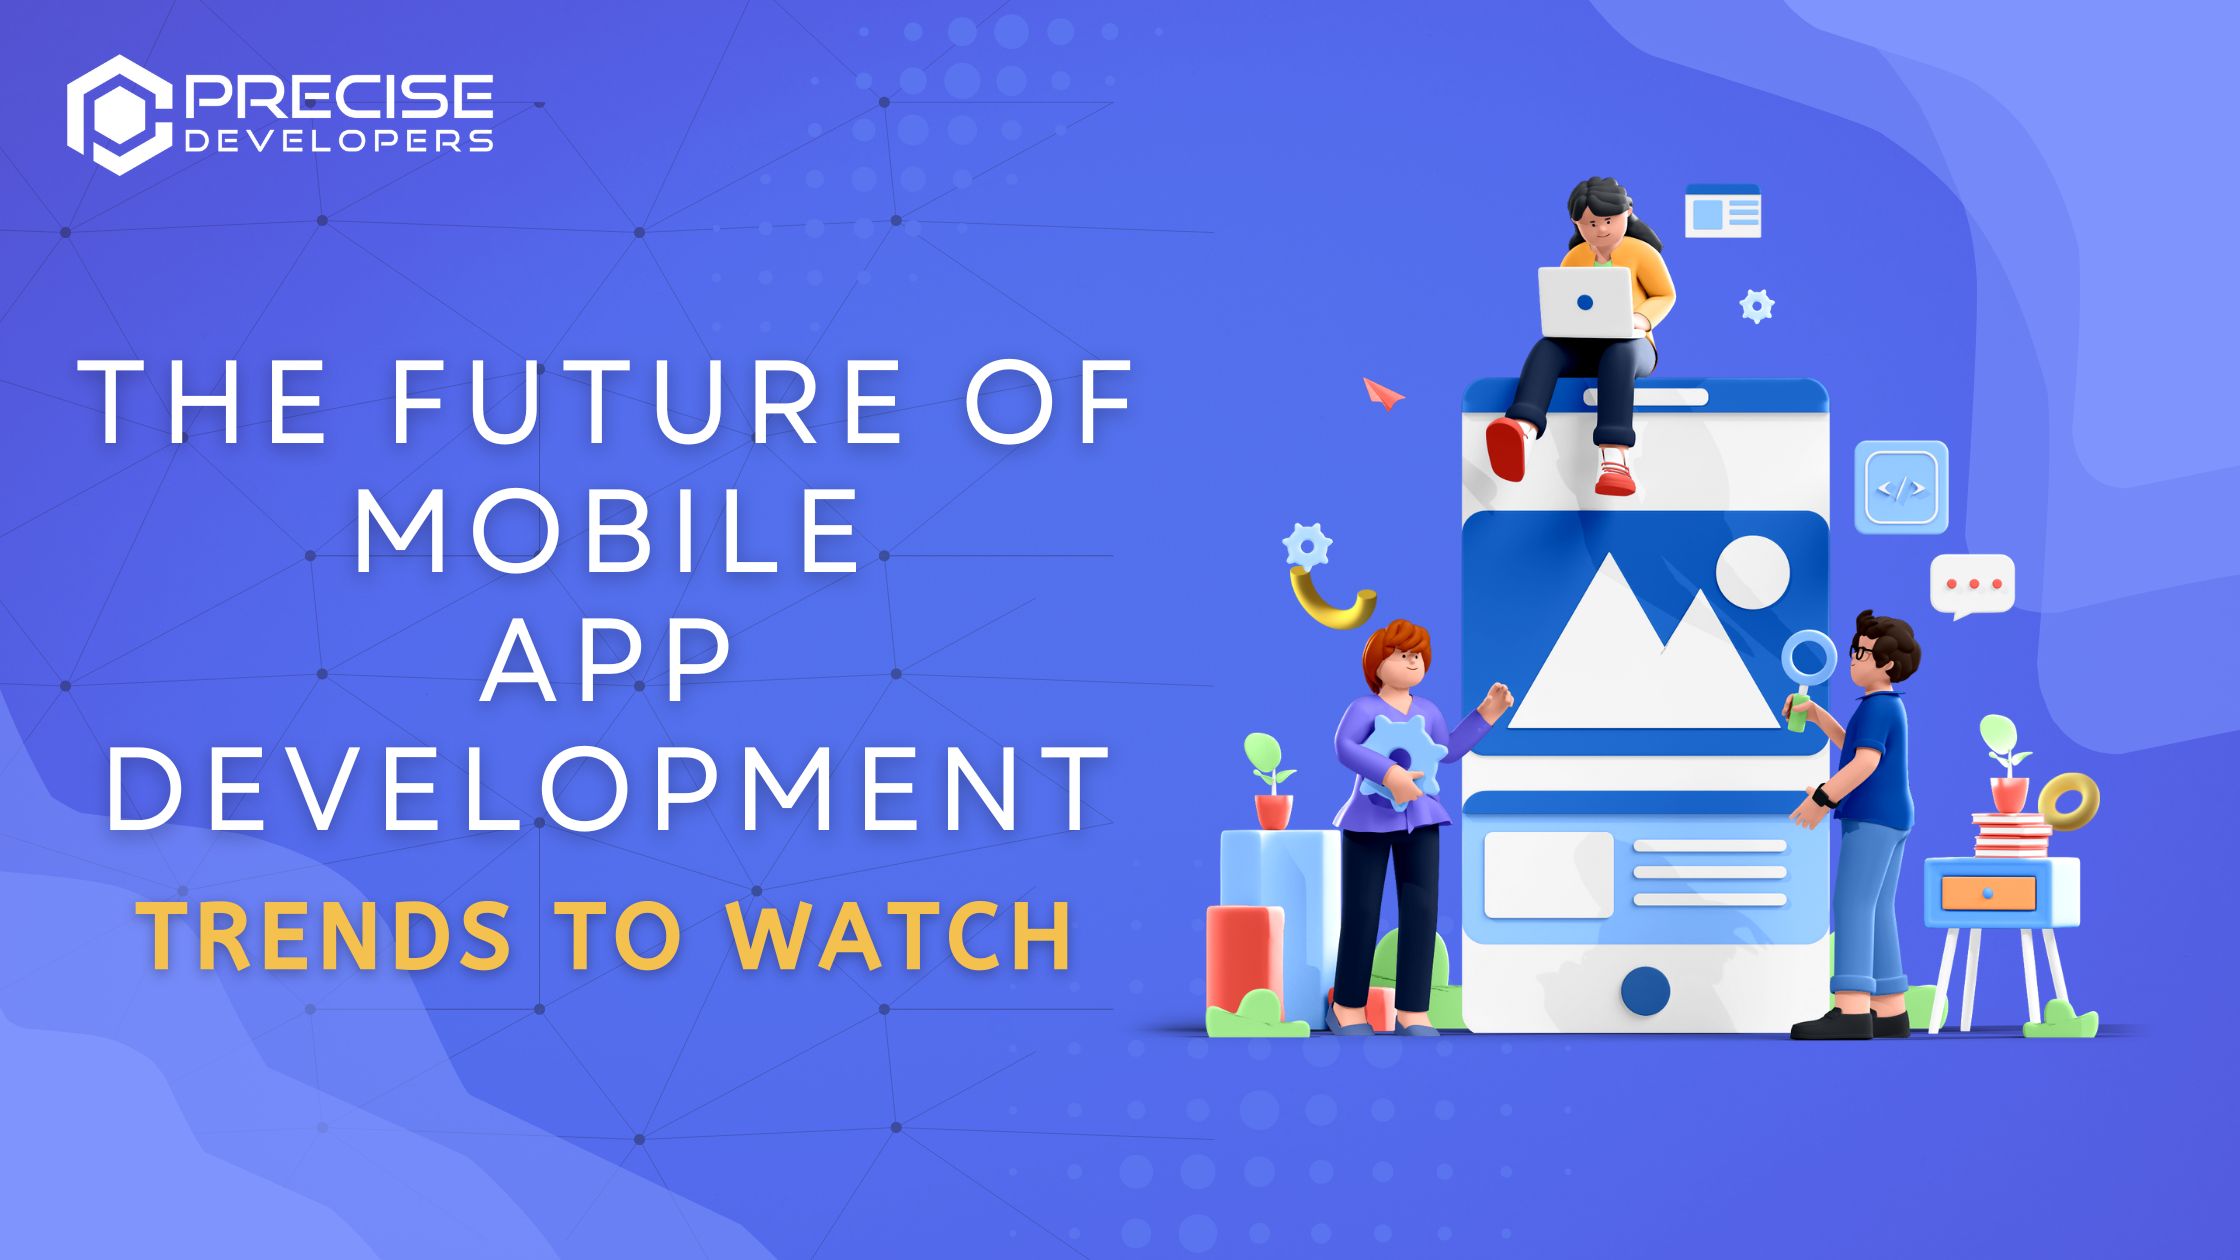 The Future of Mobile App Development Trends to Watch